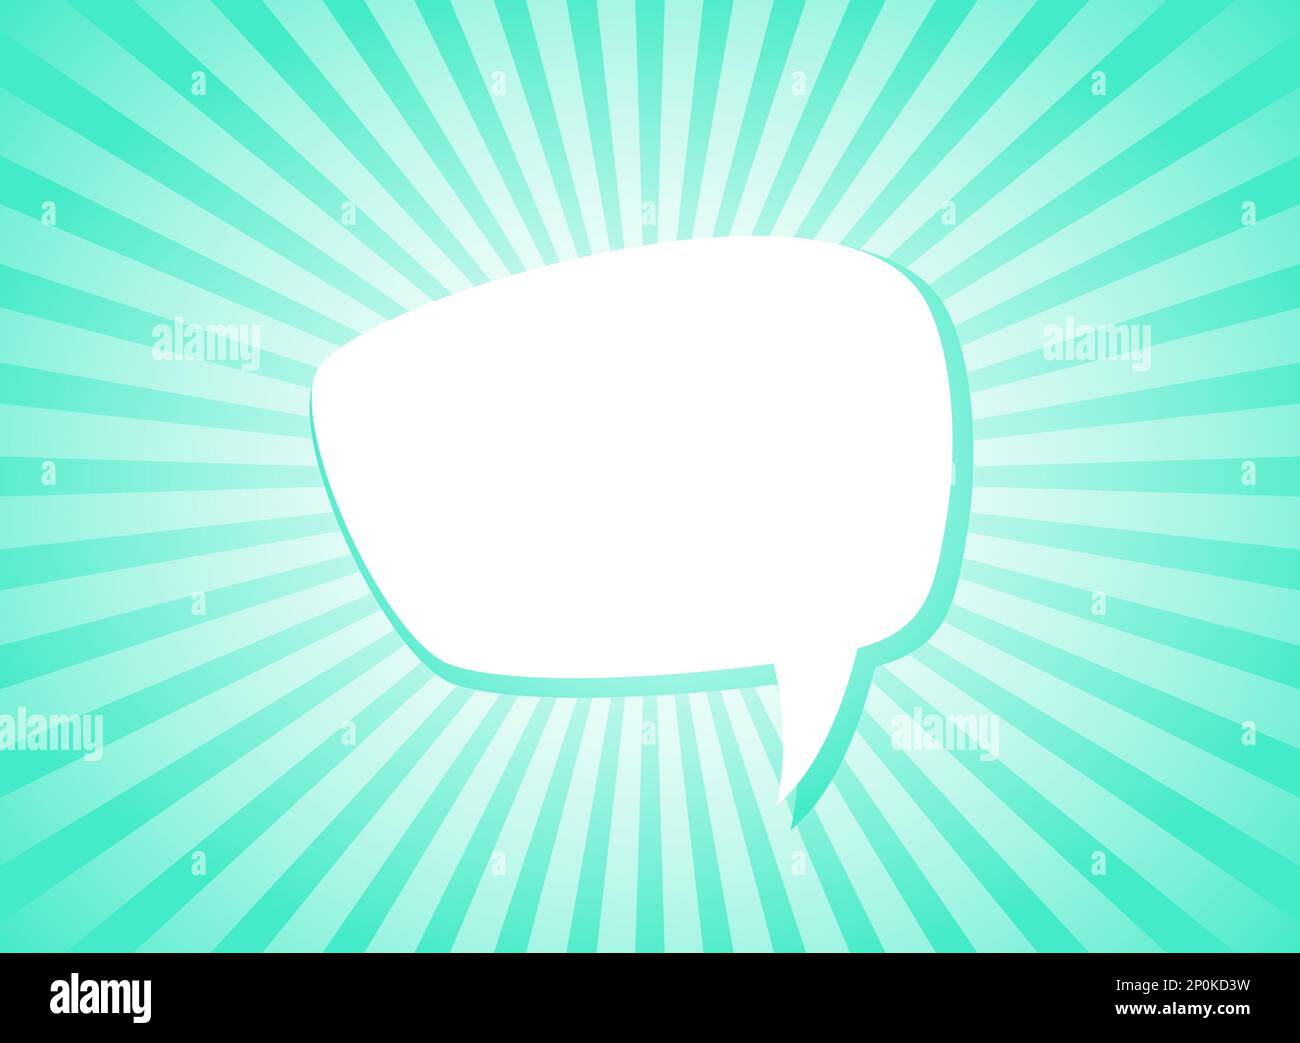 Shining hint. Quick tips, helpful tricks banner. Chat speech bubble on sunlight yellow background. Help, idea or advice concept. Tint, quote, citation Stock Vector